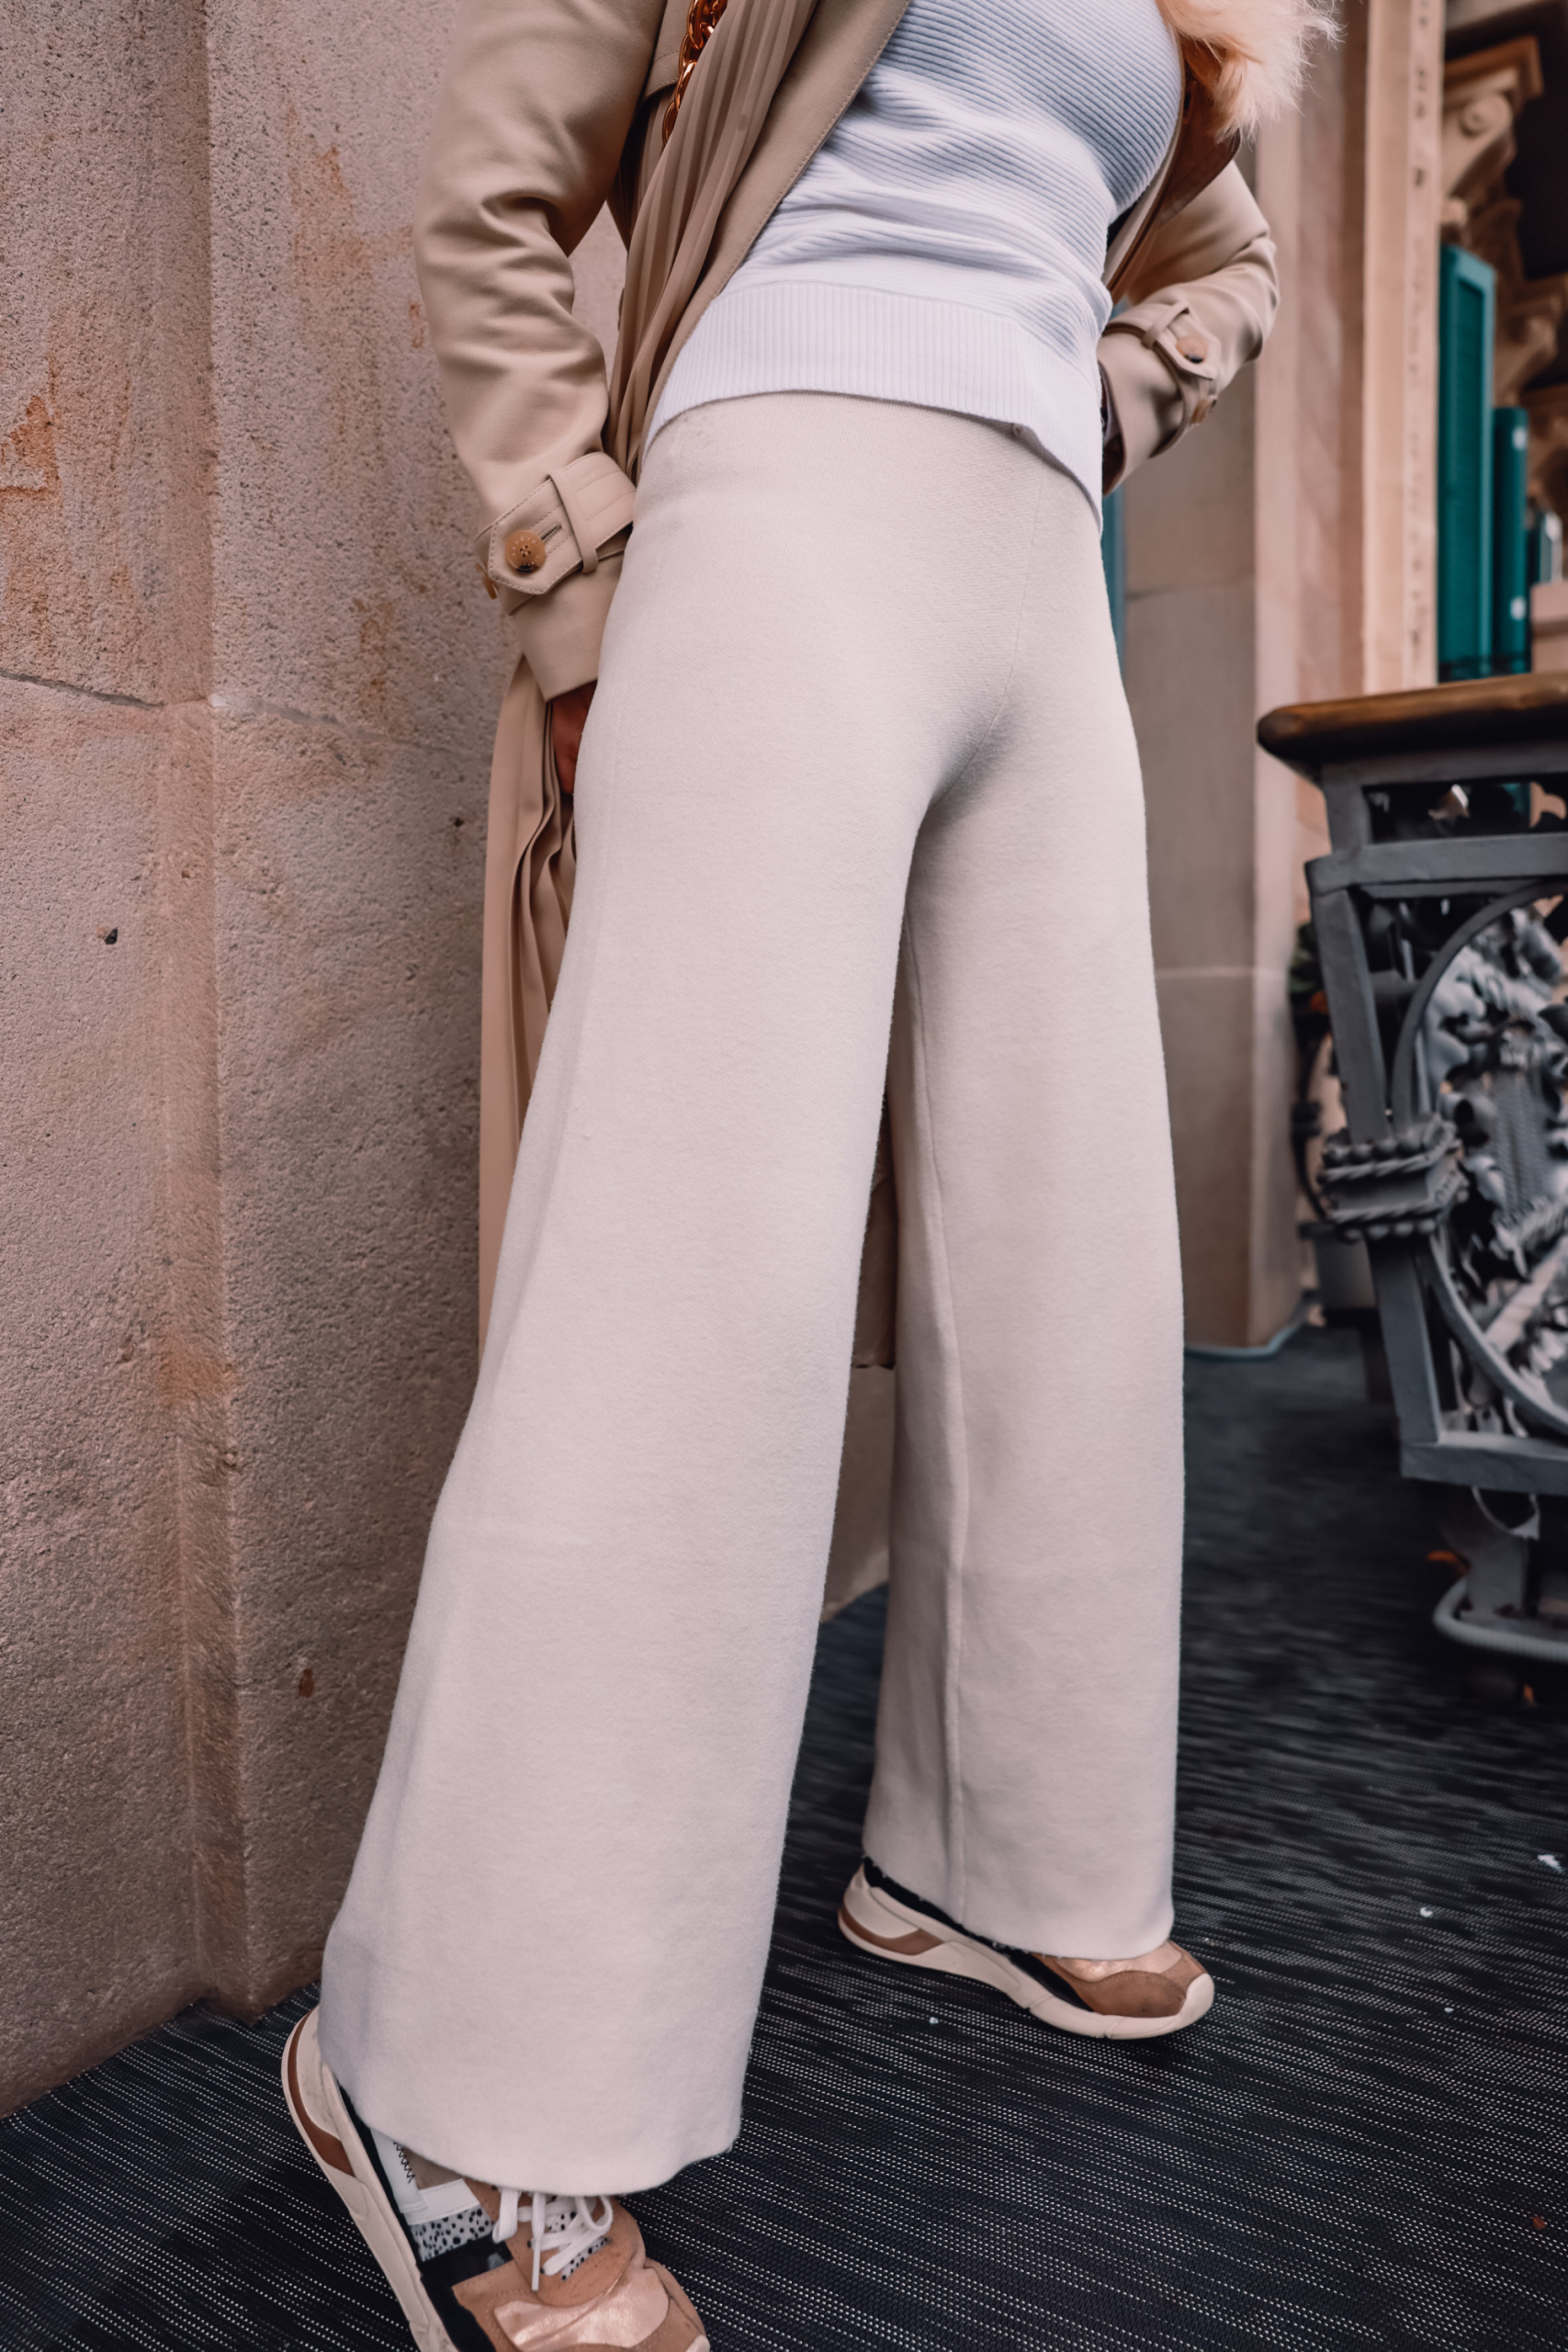 stylish loungewear, loungewear from couch to curb, how to transition loungewear, erin busbee, mango wide leg lounge pants, gola sneakers, white ribbed one shoulder sweater, mango quilted bucket hat, sandro trench, bottega veneta cassette bag, el palauet, barcelona, spain